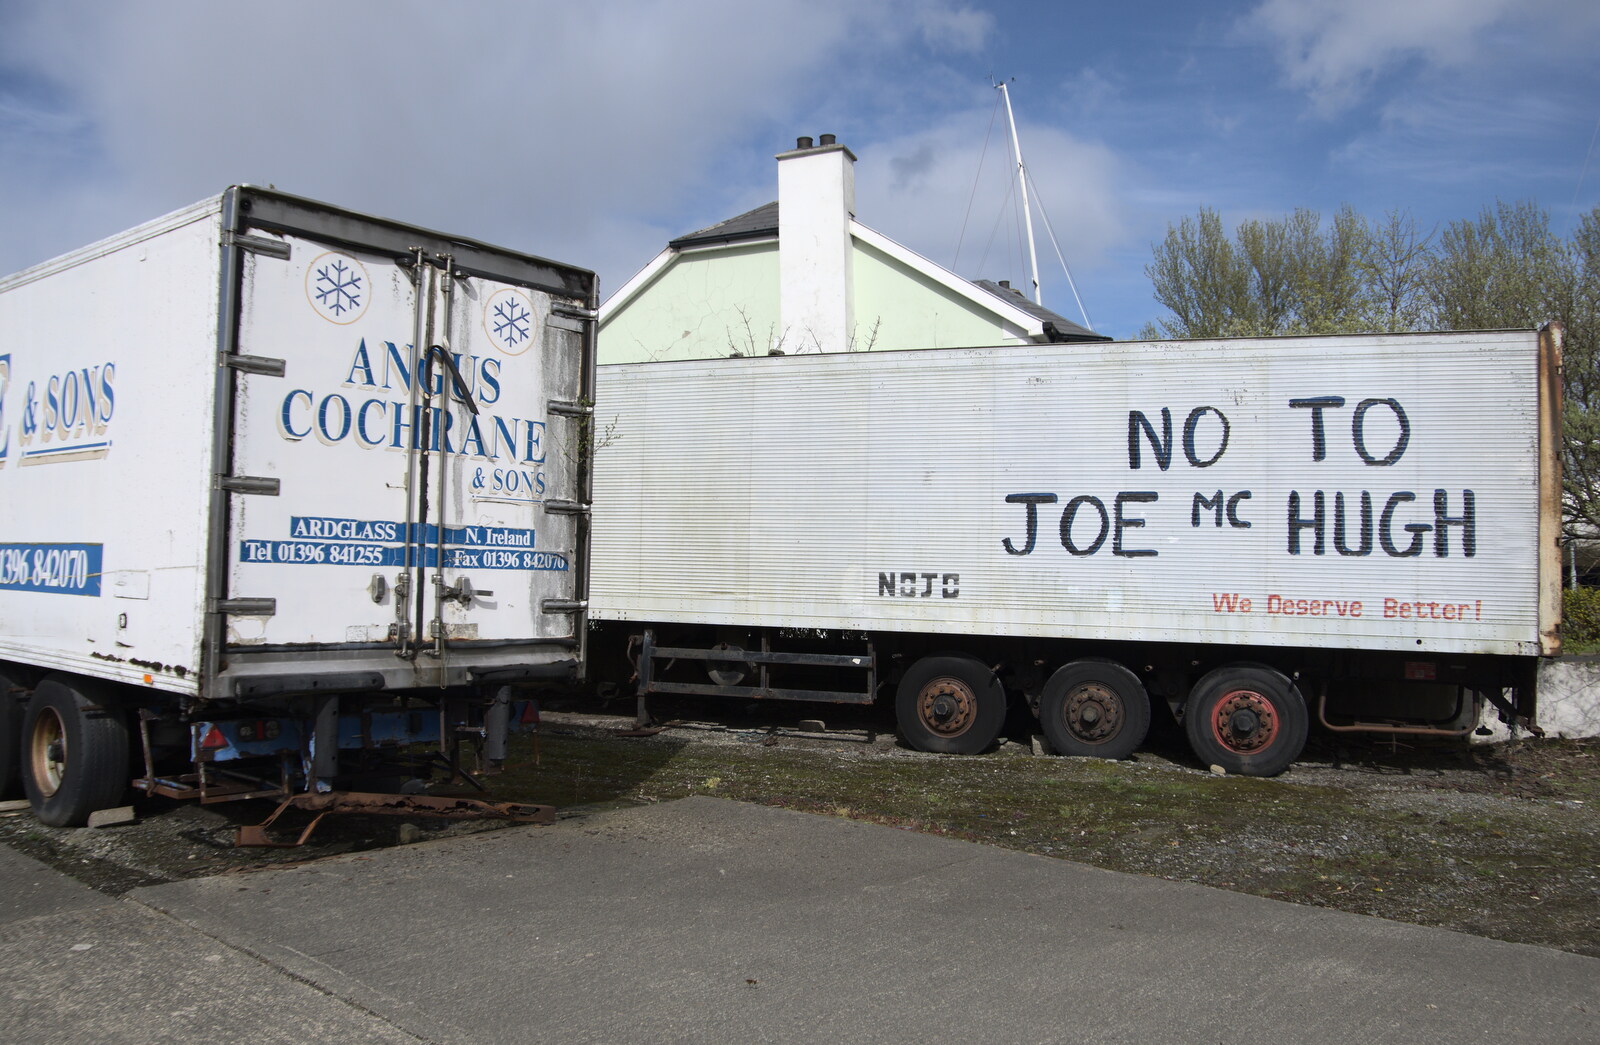 Greencastle, Doagh and Malin Head, County Donegal, Ireland - 19th April 2022: Derelict trailers say no to Joe McHugh